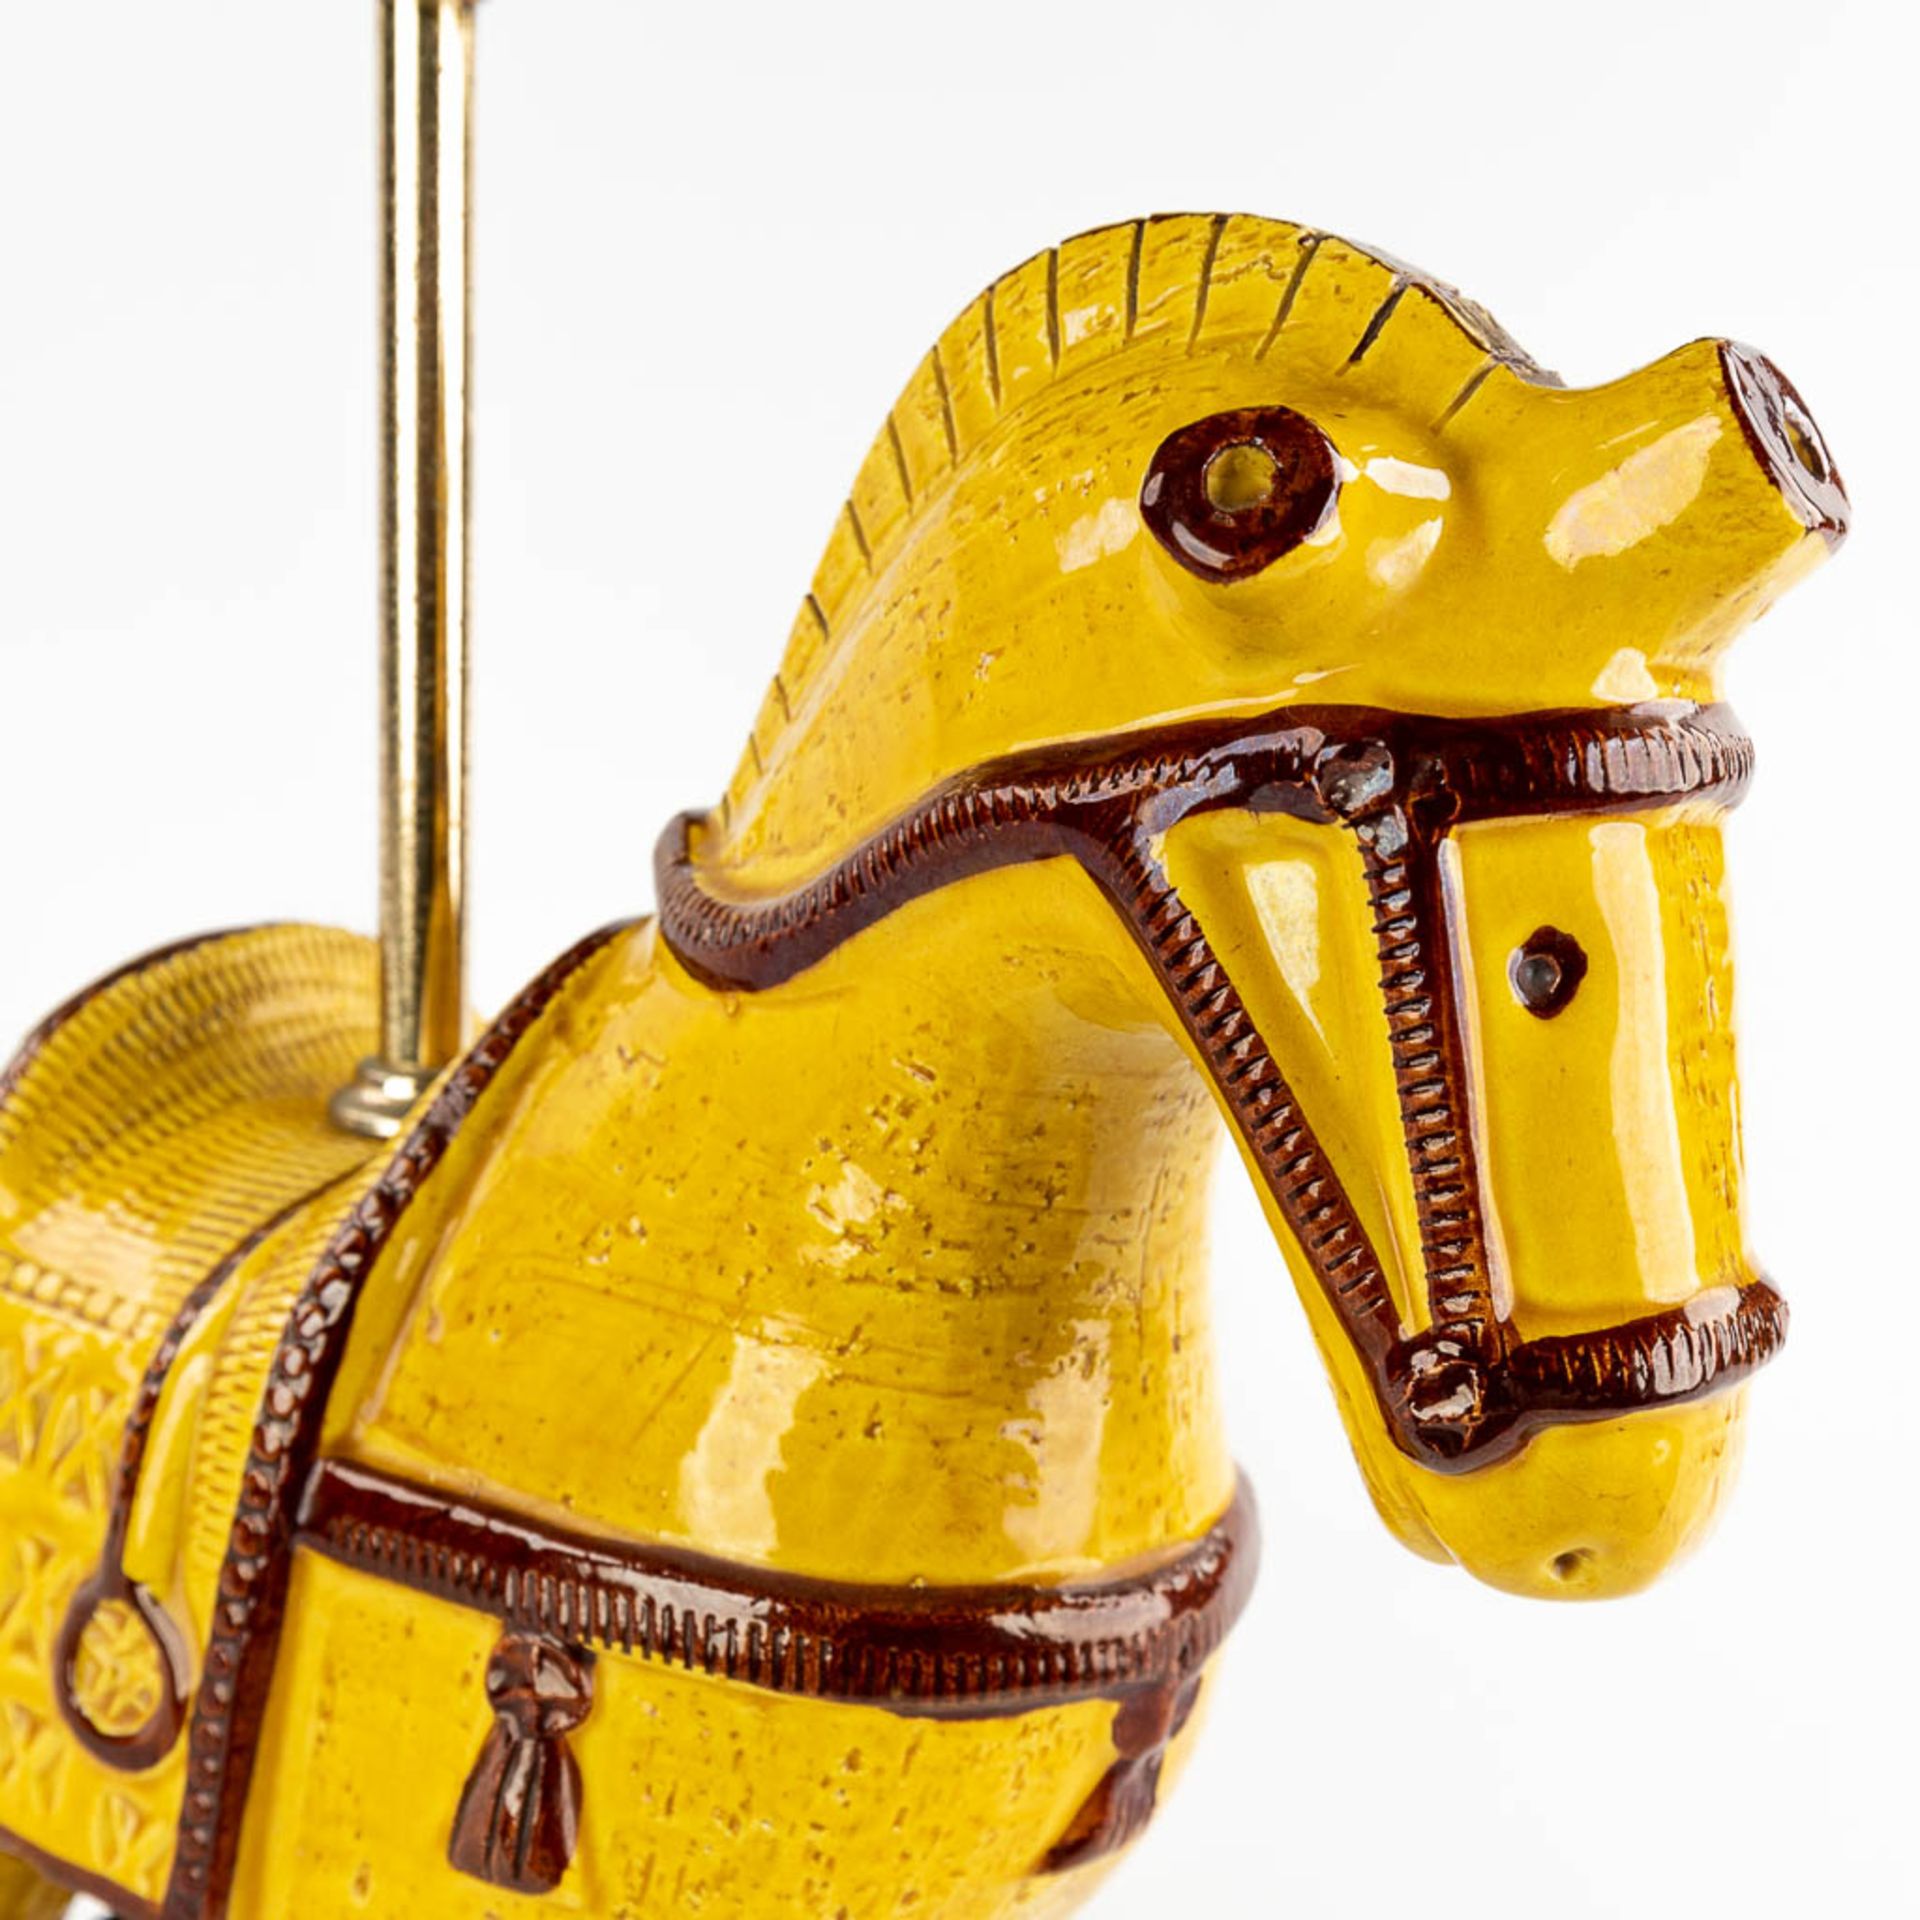 Aldo LONDI (1911-2003) 'Table Lamp with a yellow horse' for Bitossi. (D:12 x W:30 x H:32 cm) - Image 8 of 12